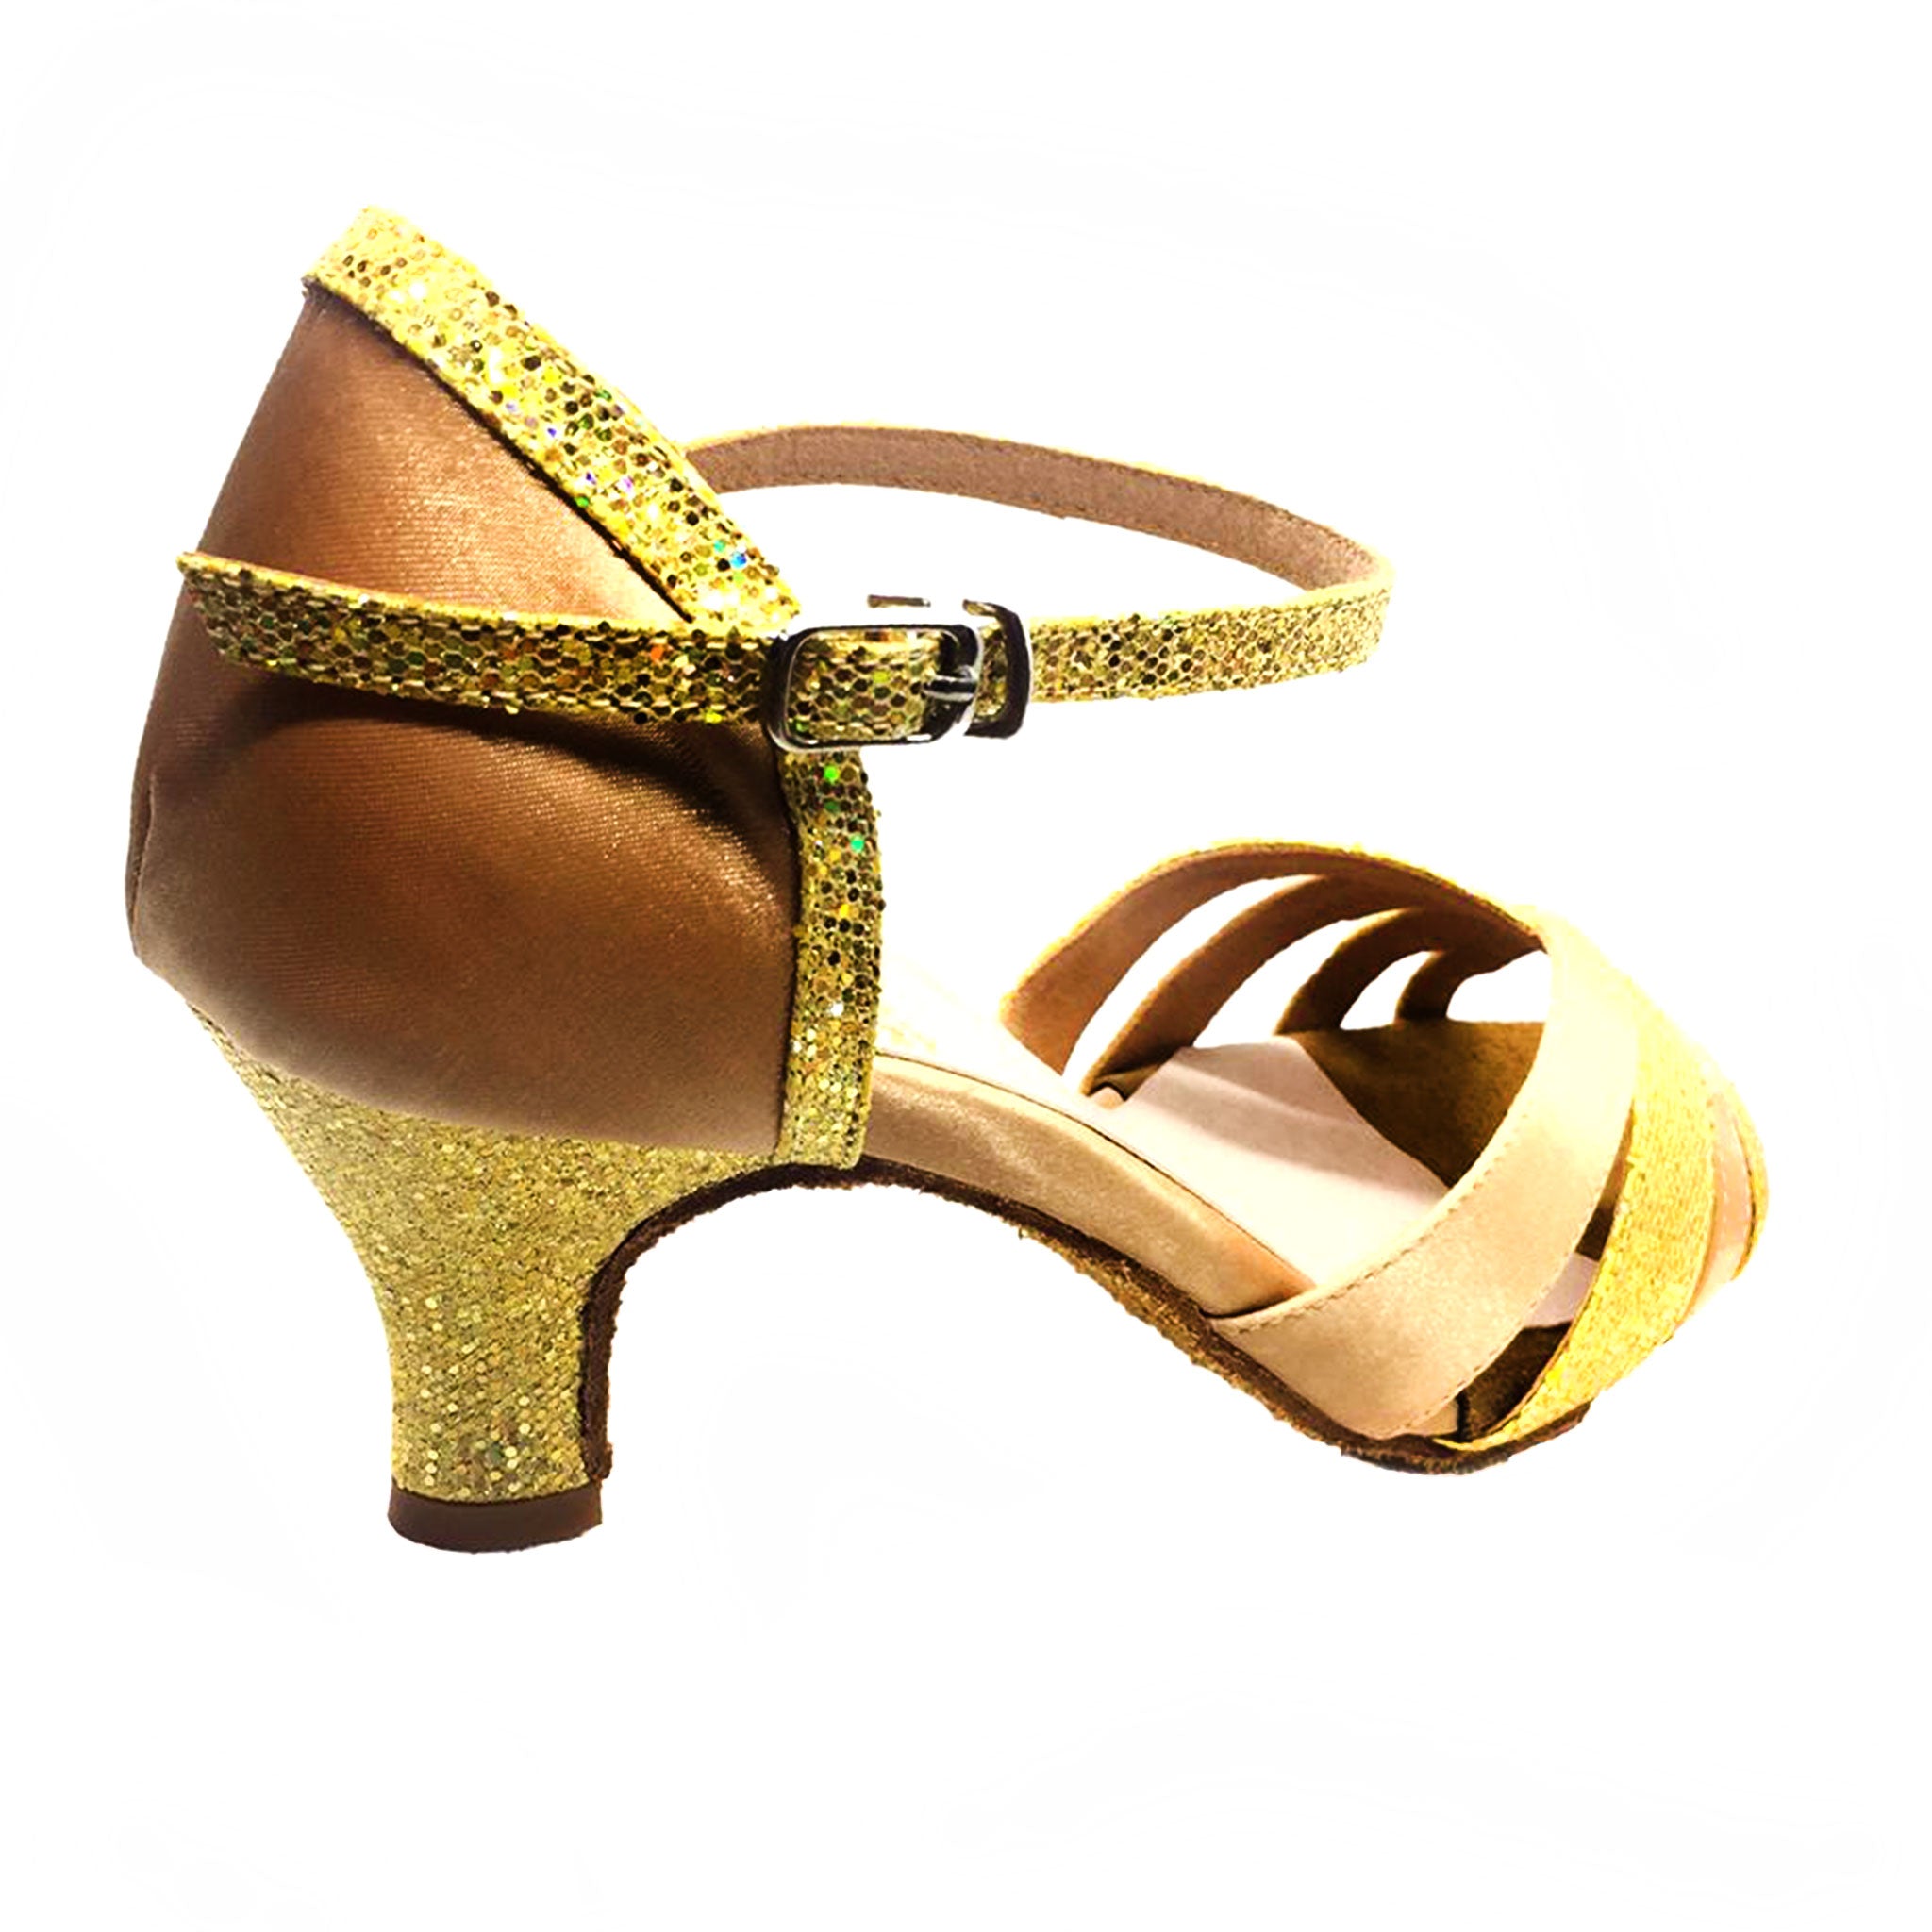 HelpMeDance - Dancing Shoe Leather Female - KVE-1097184 - 2.5-3 Inches Heel - Simpal Boutique